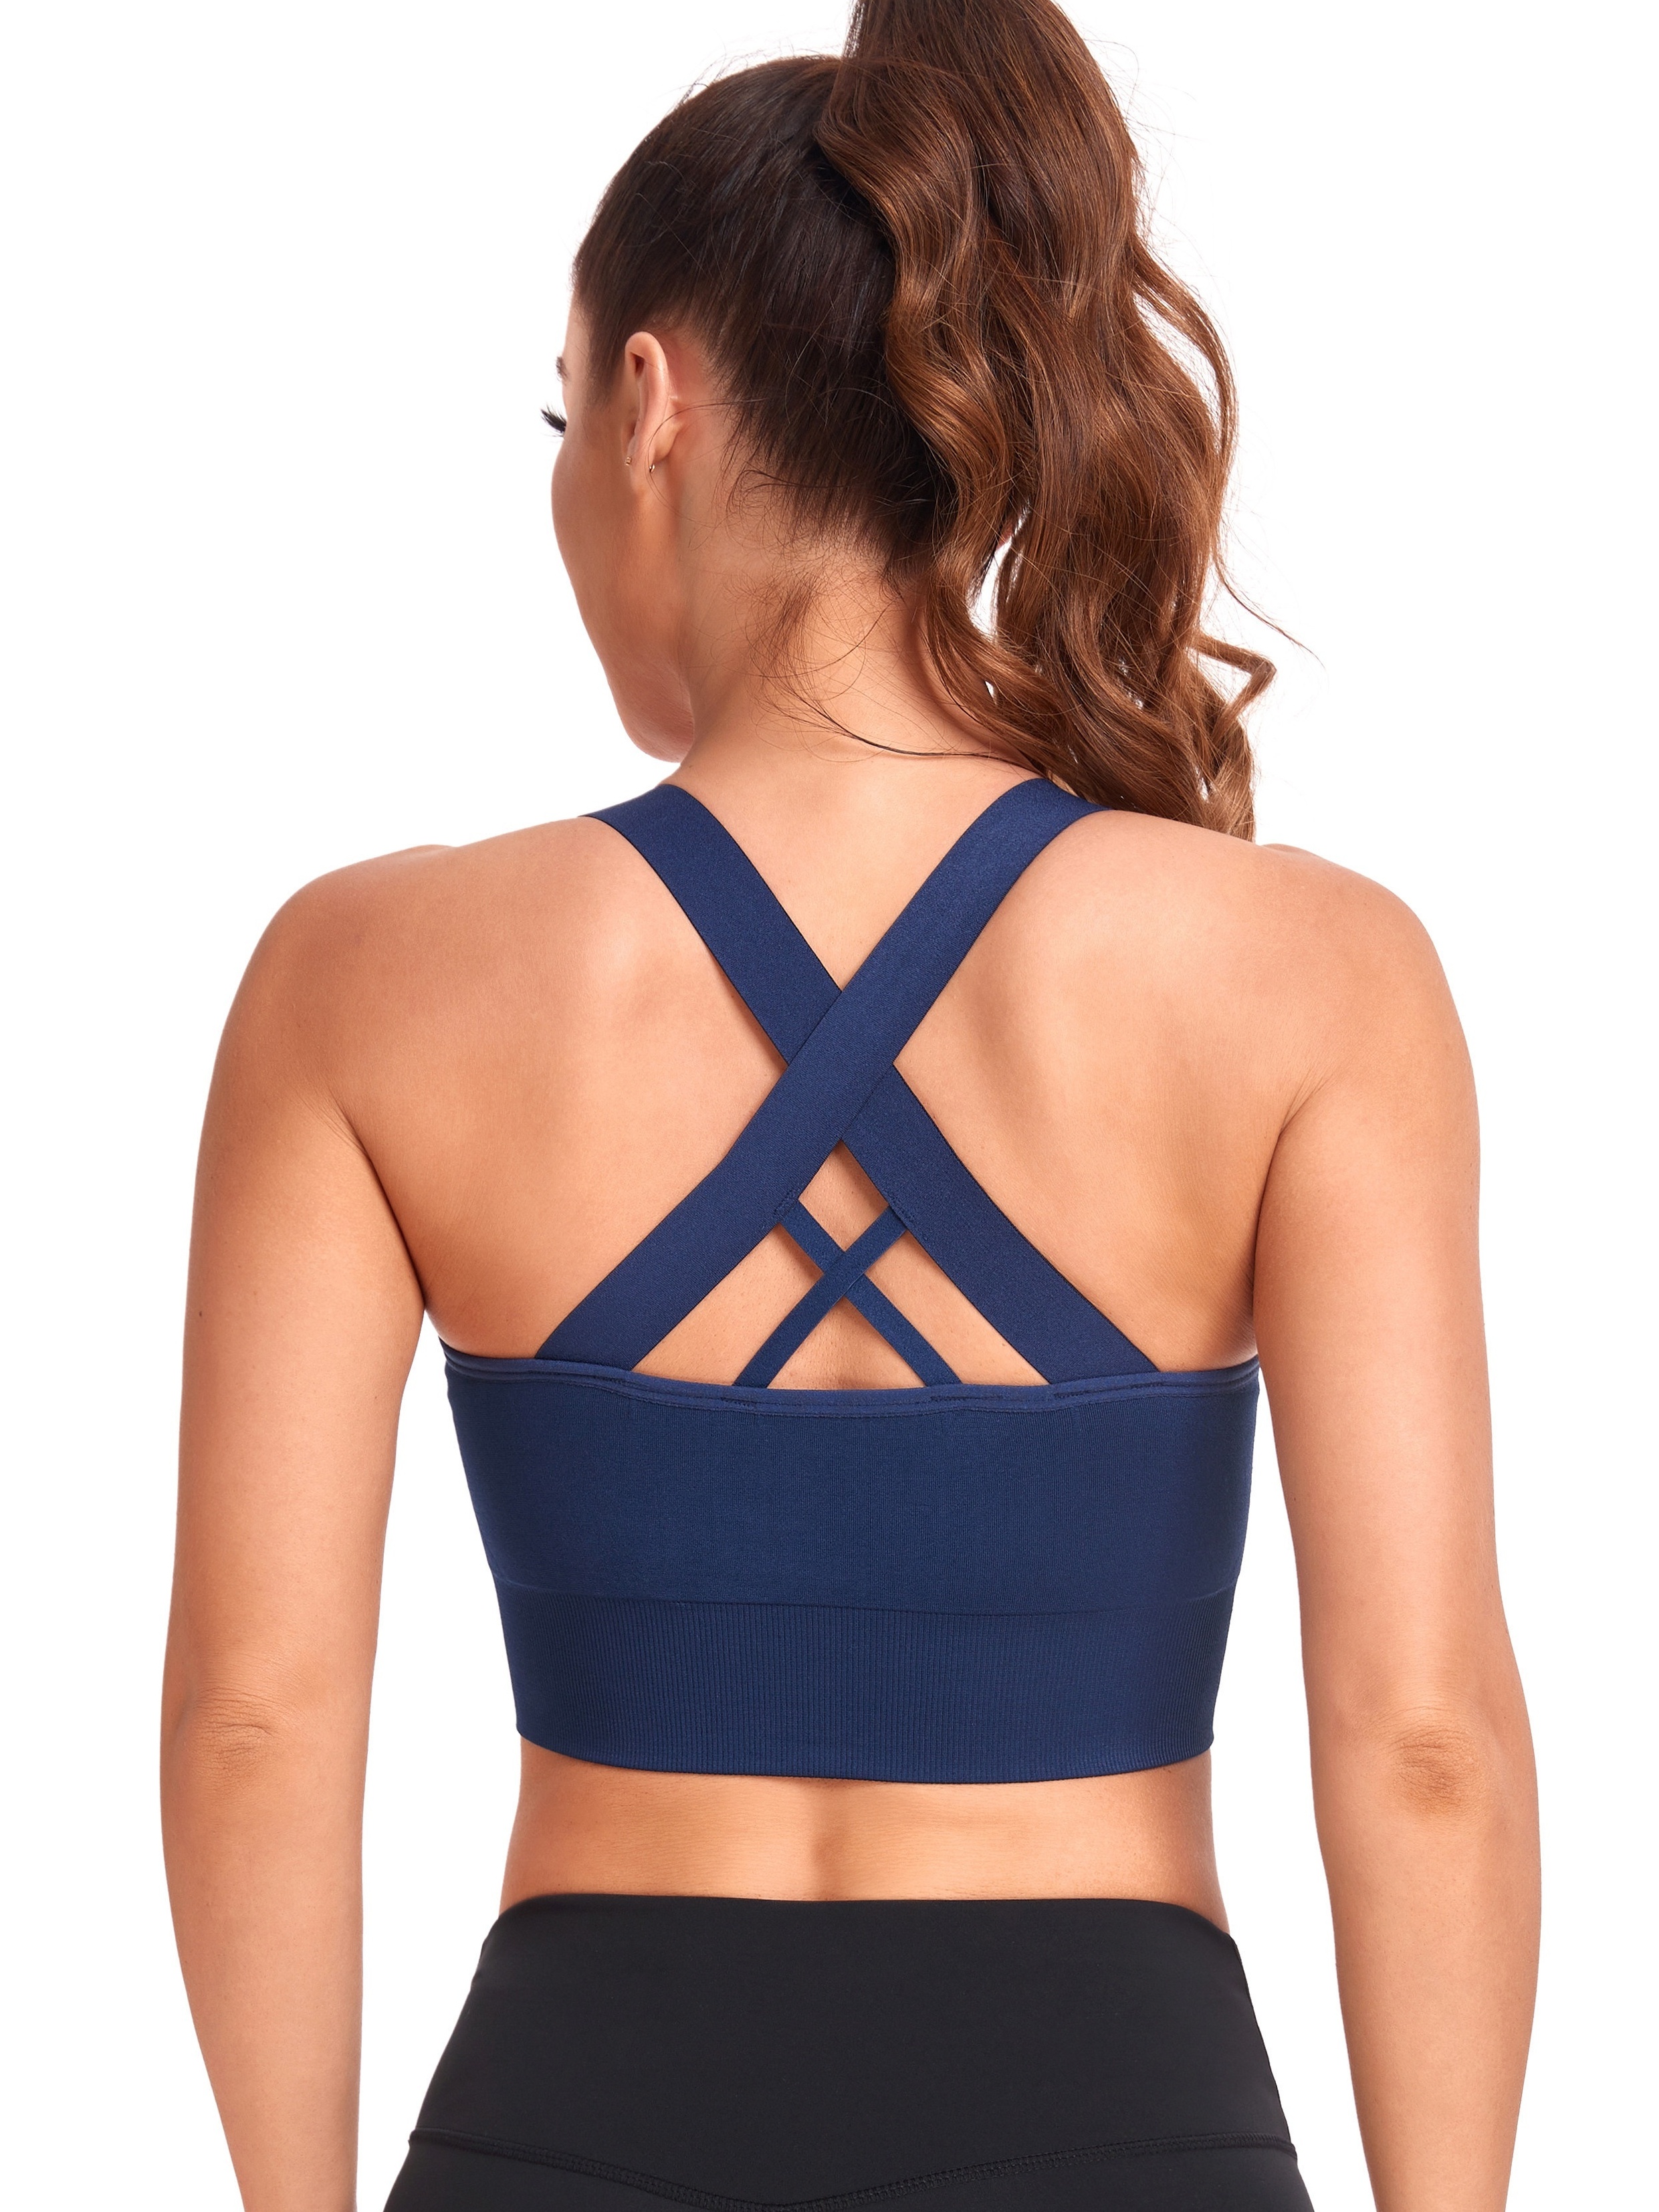 High Impact Sports Bras for Women Running High Support Yoga Gym Sports Bra  Workout Athletic Criss Cross Backless Top